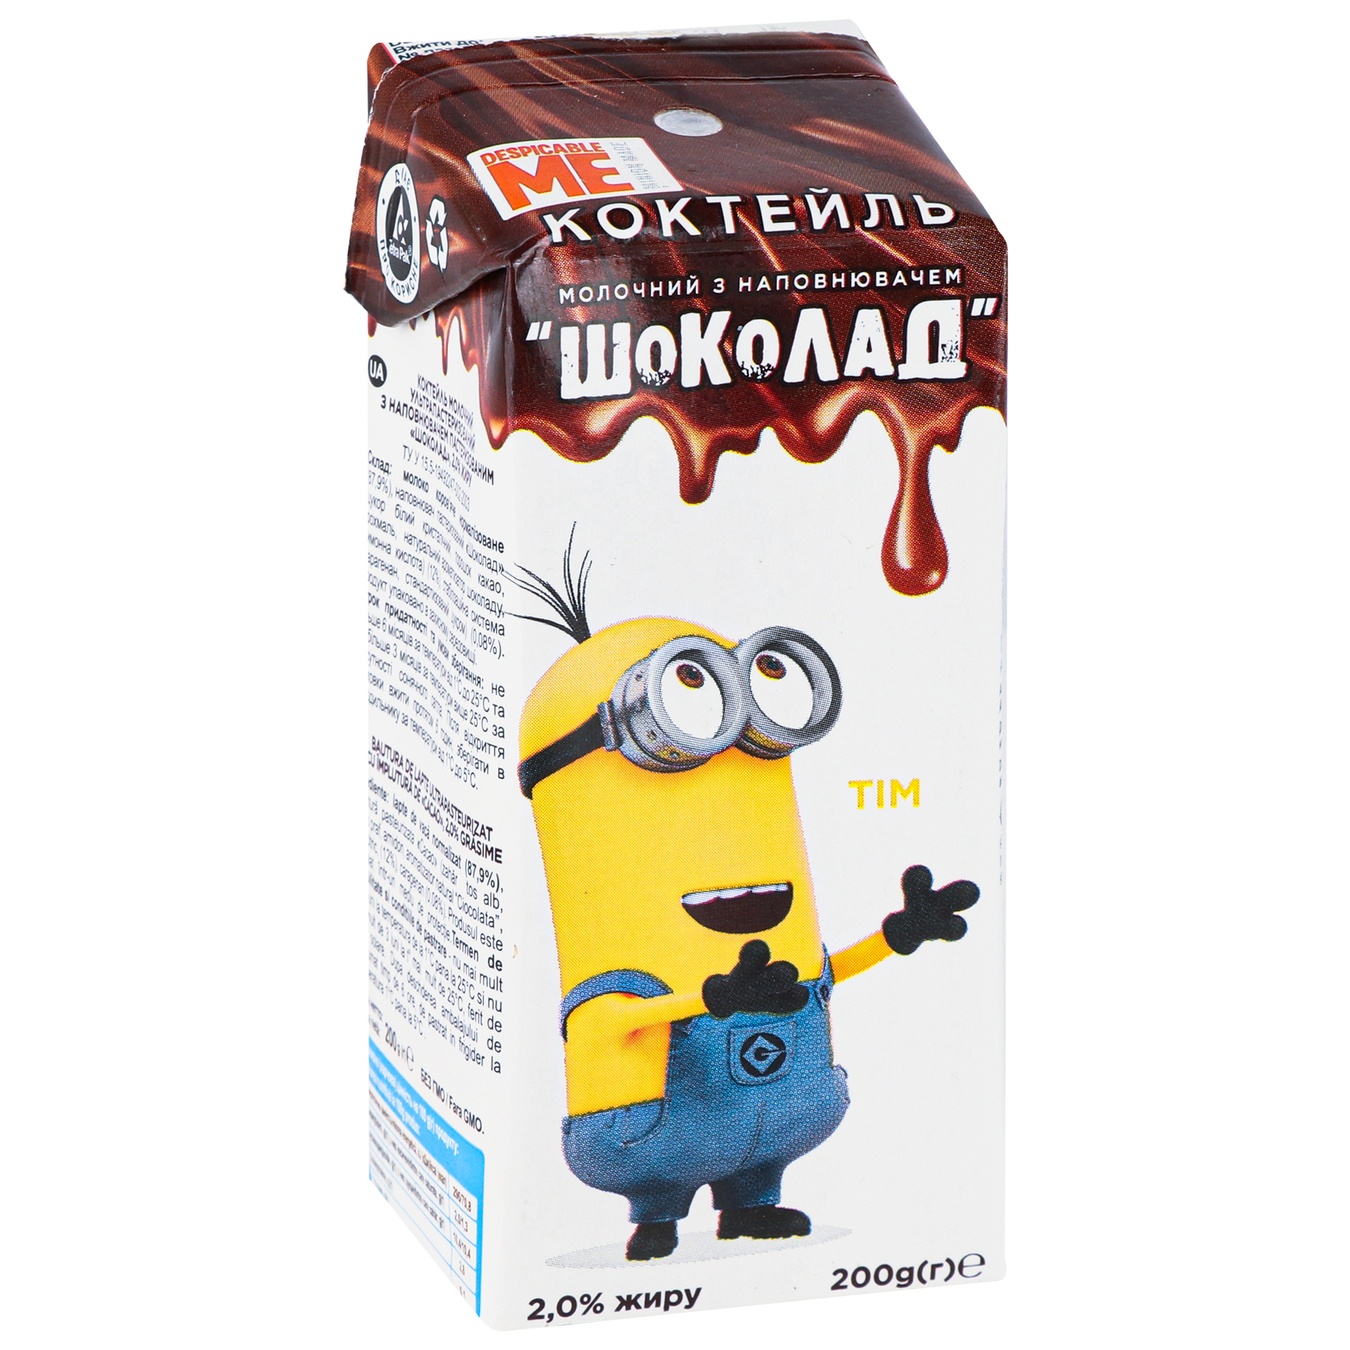 Milk Cocktail Despicable Me with Chocolate Filling 2% 200g 6